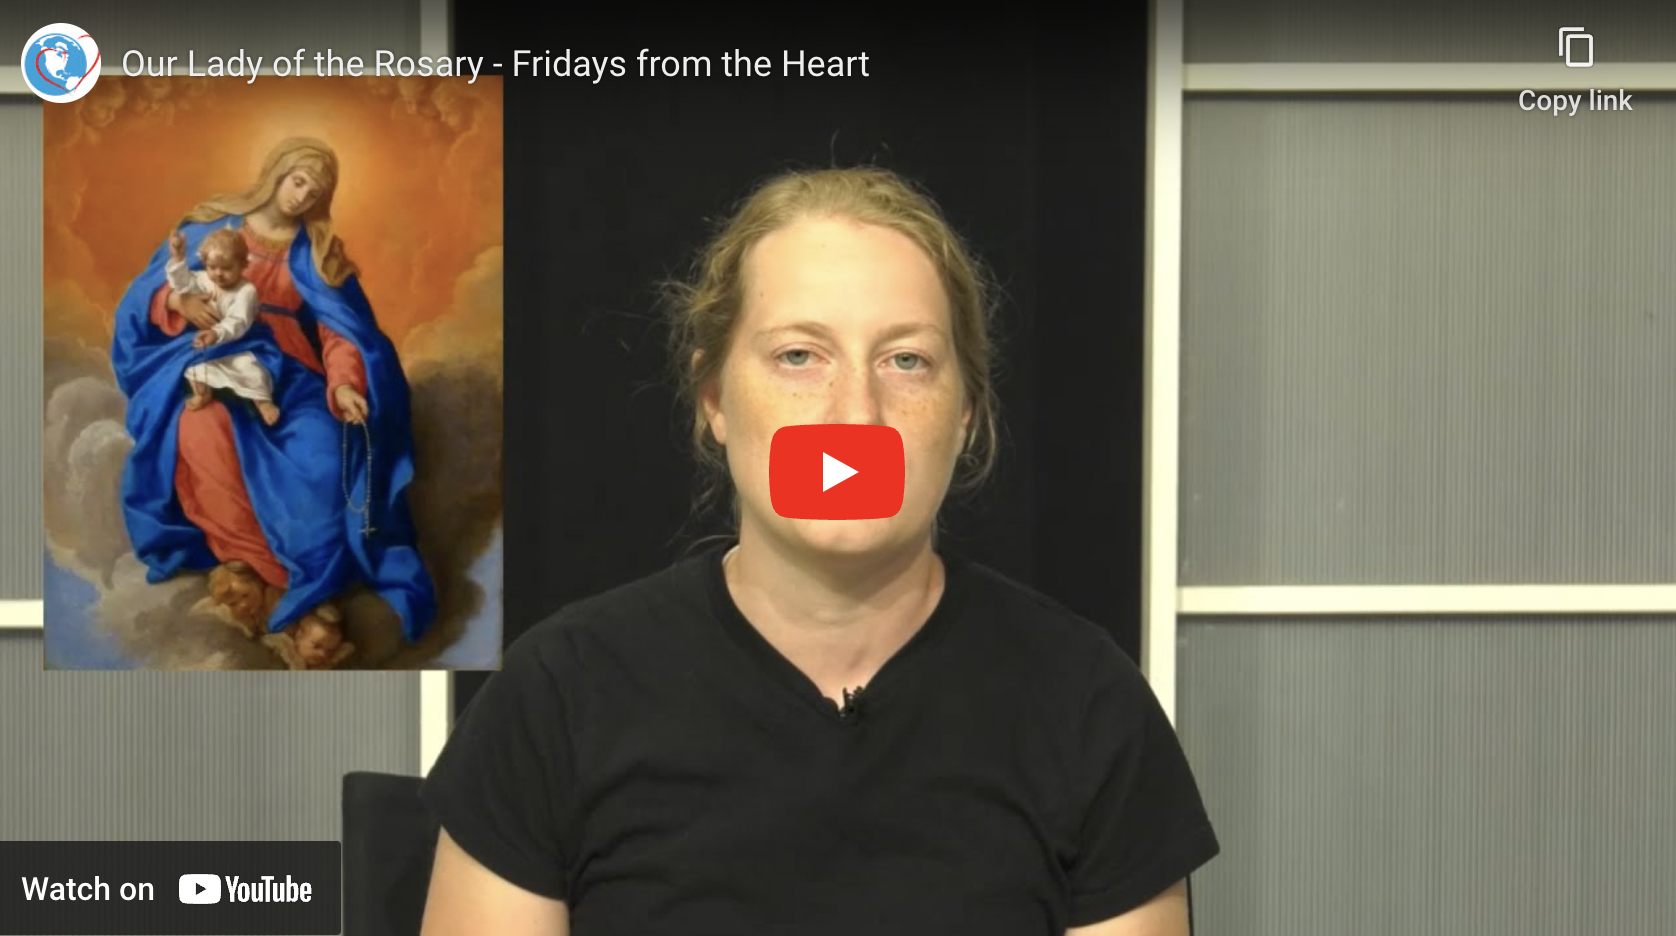 Our Lady of the Rosary – Fridays from the Heart